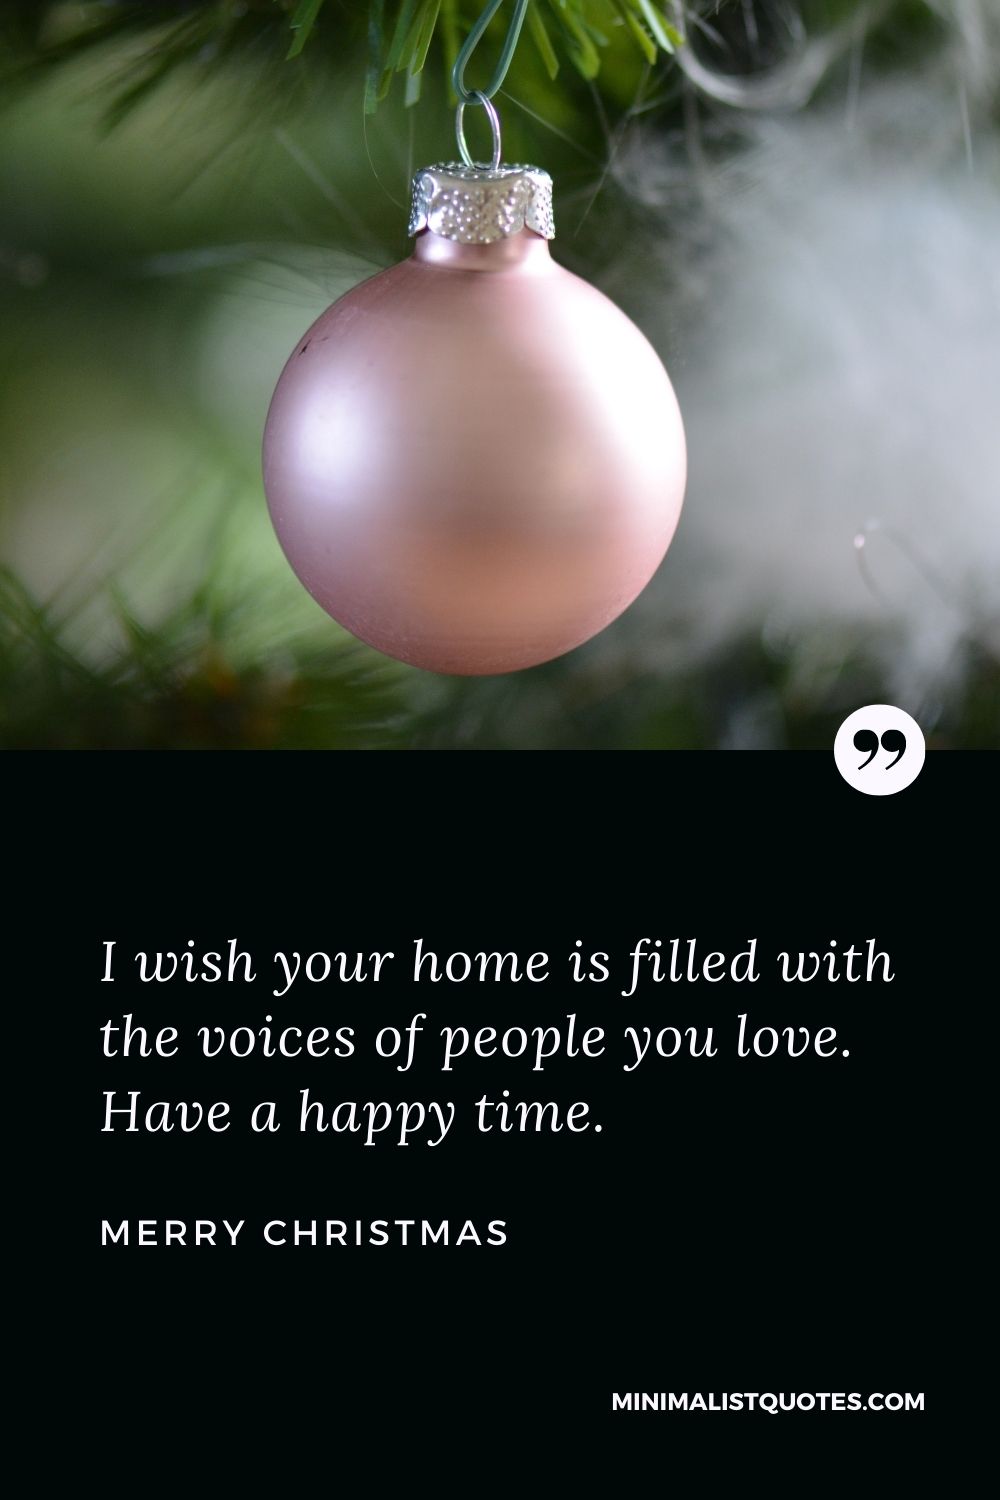 I wish your home is filled with the voices of people you love ...